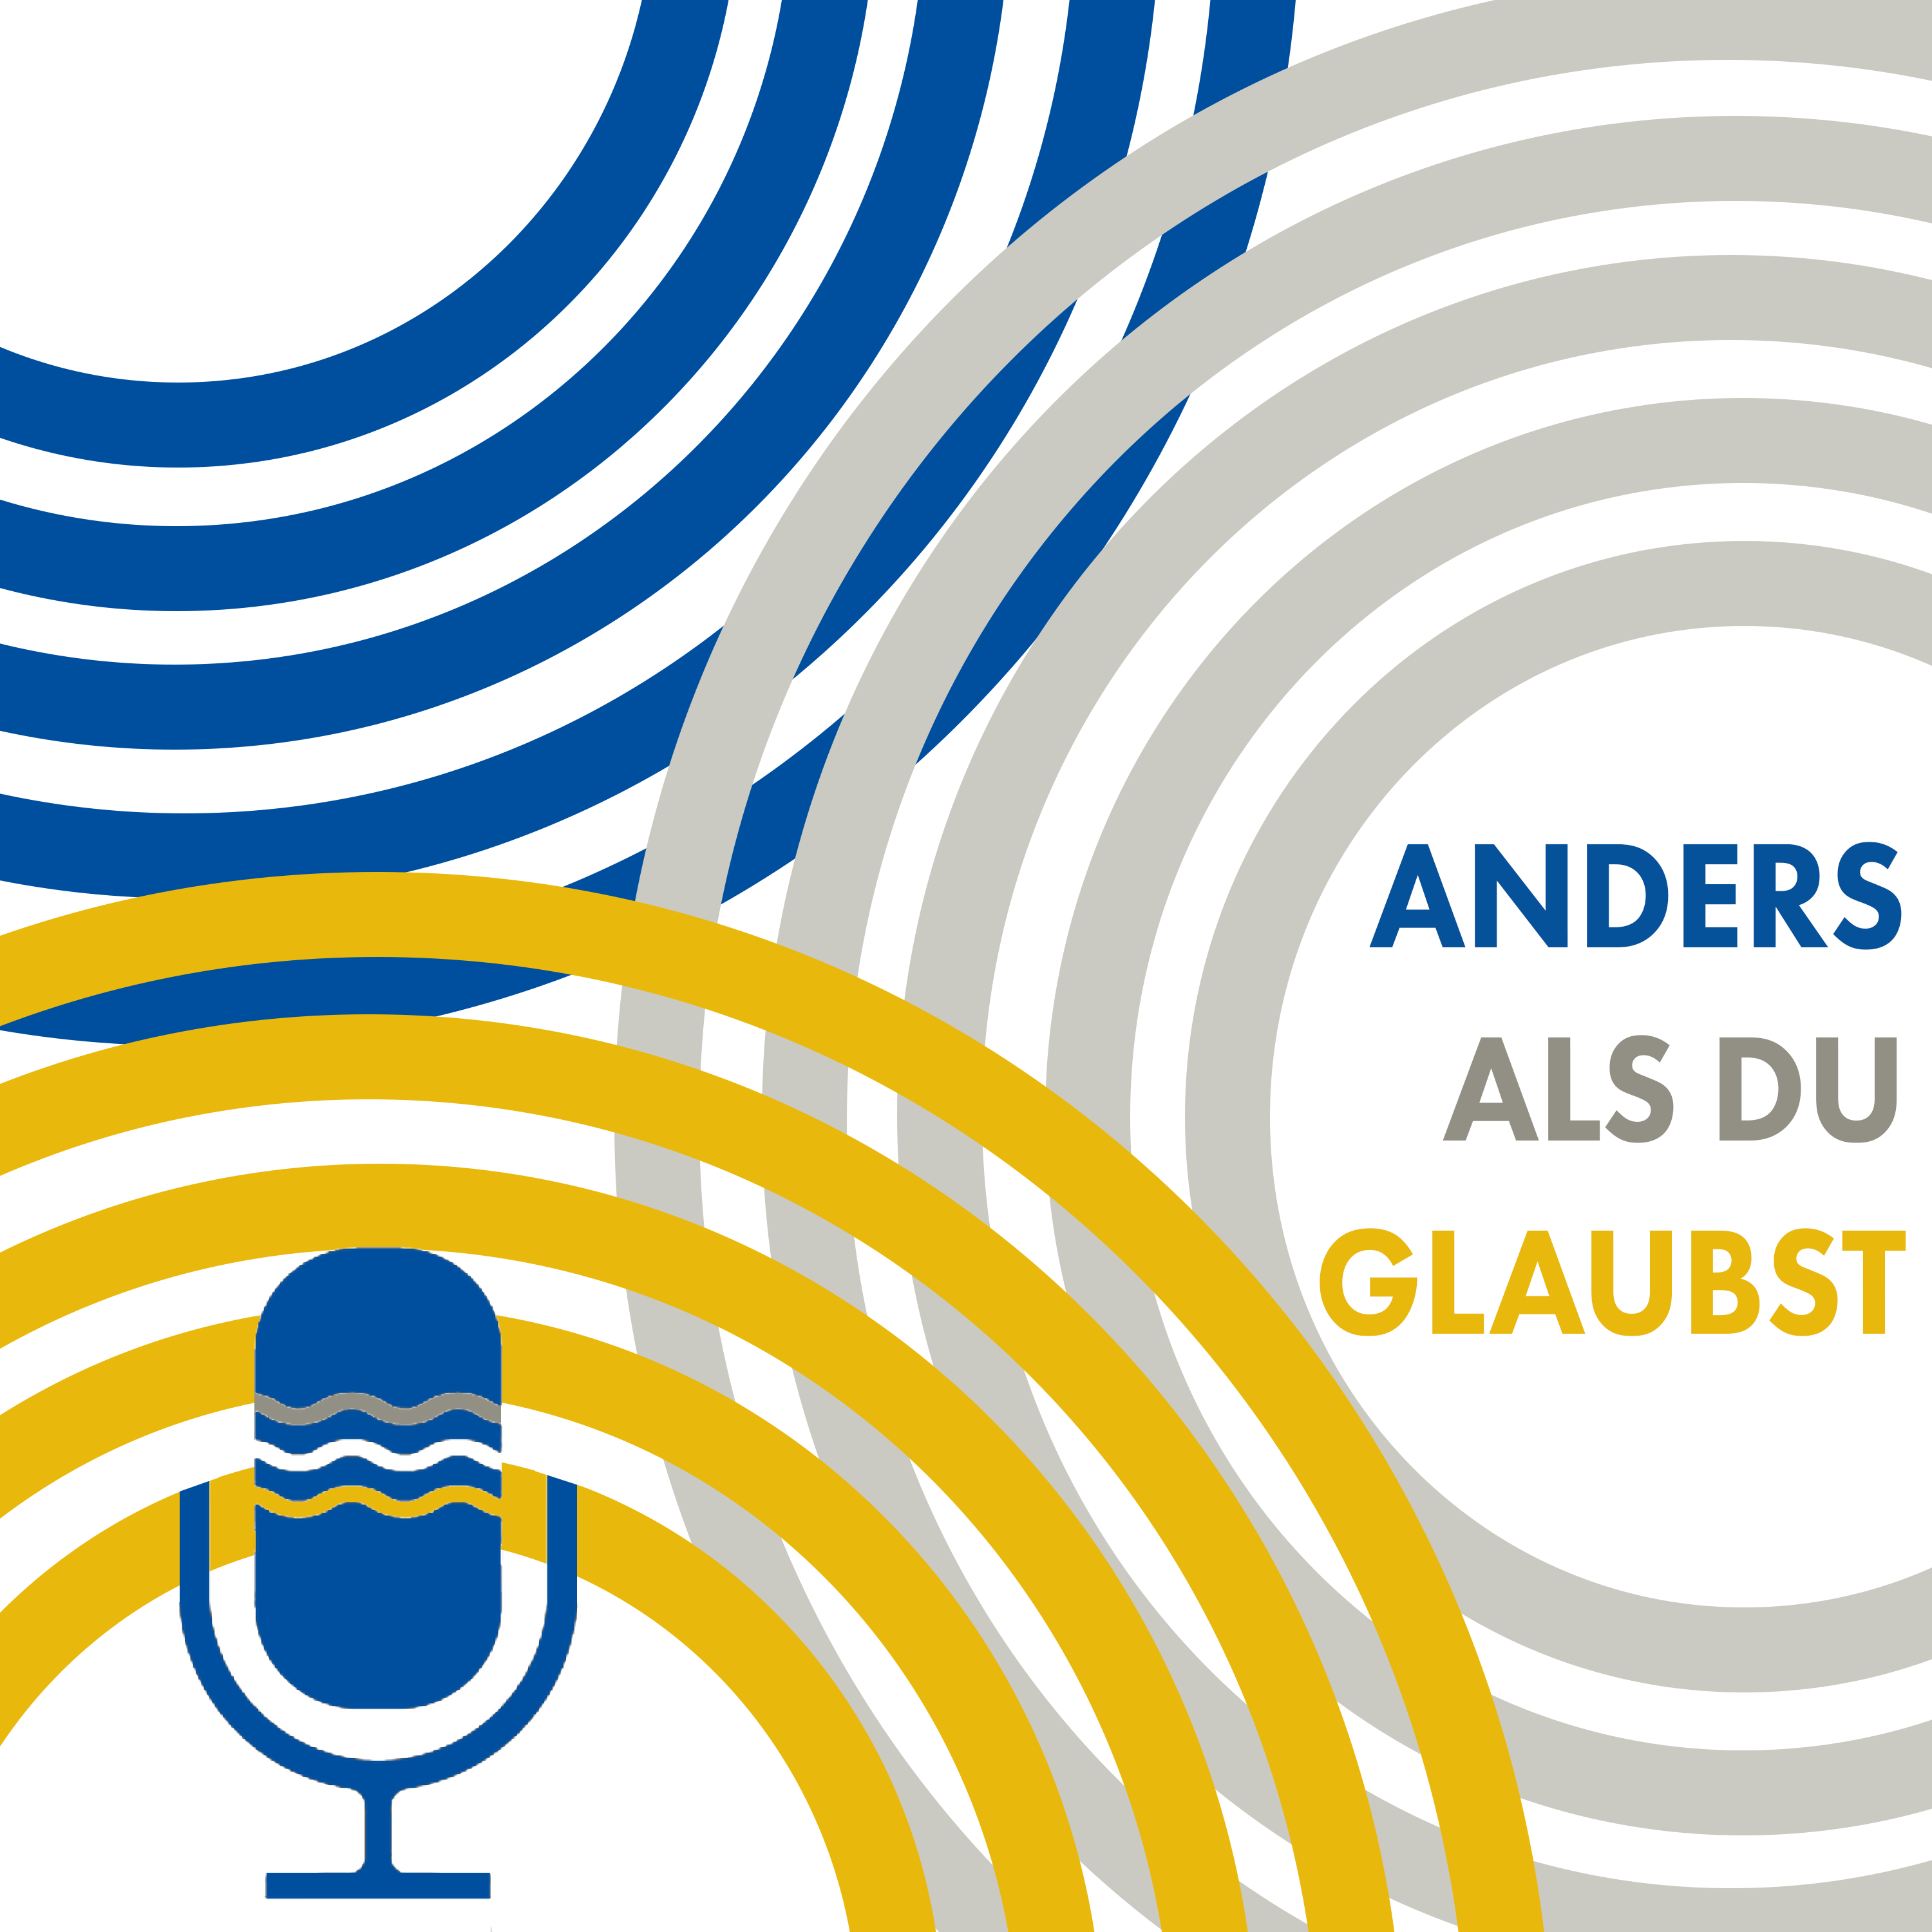 Podcast-Empfehlung